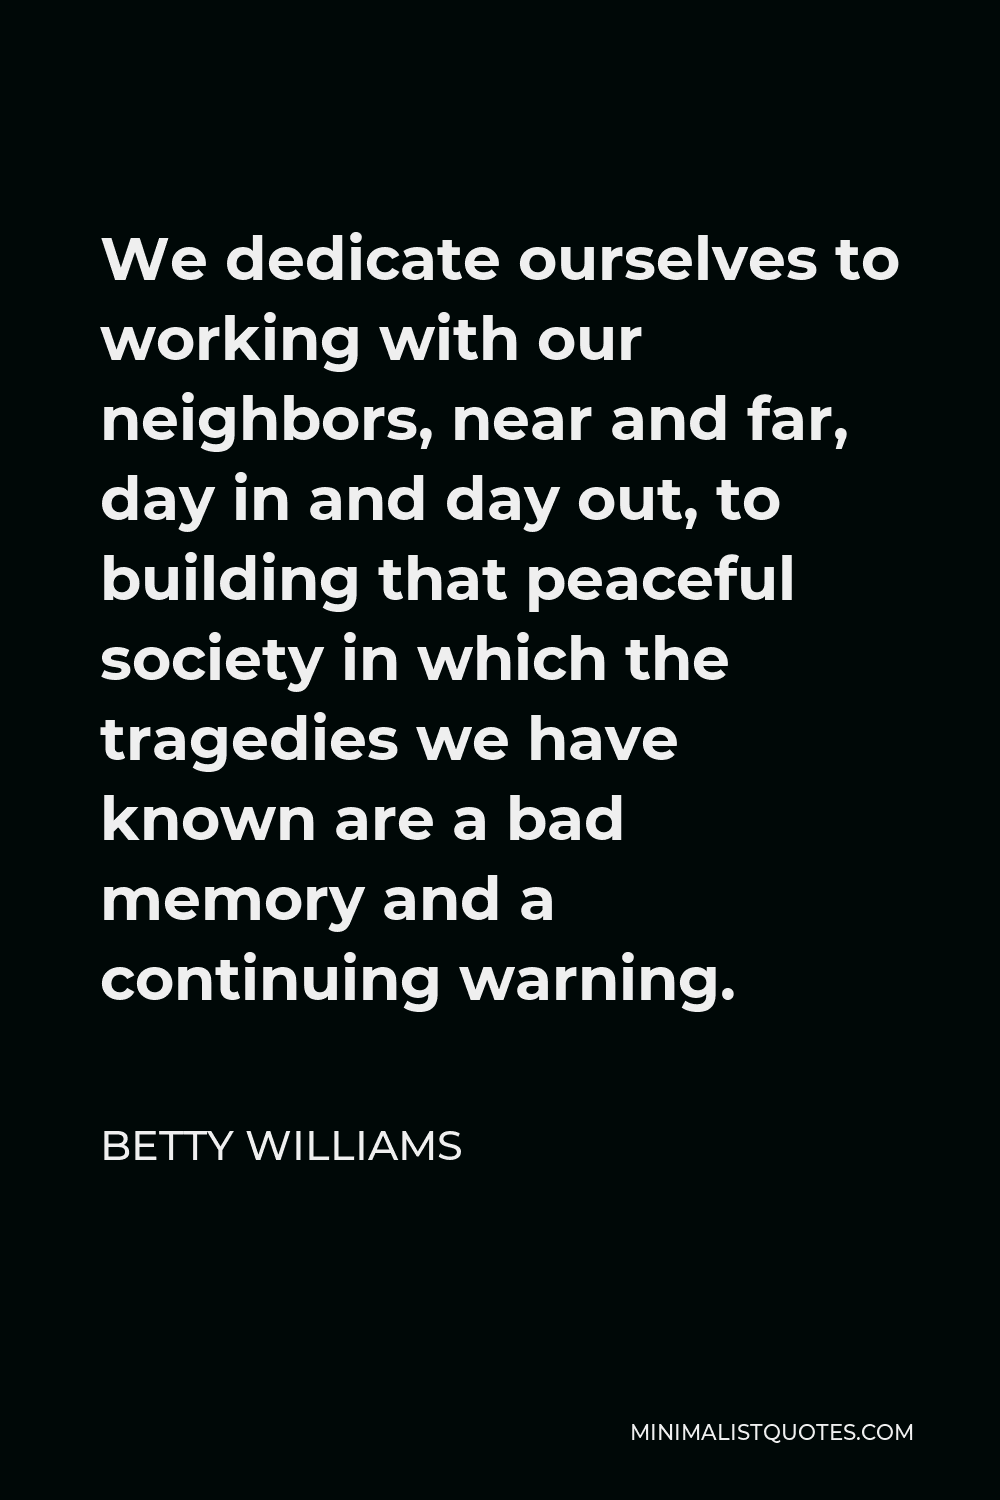 Betty Williams Quote - We dedicate ourselves to working with our neighbors, near and far, day in and day out, to building that peaceful society in which the tragedies we have known are a bad memory and a continuing warning.